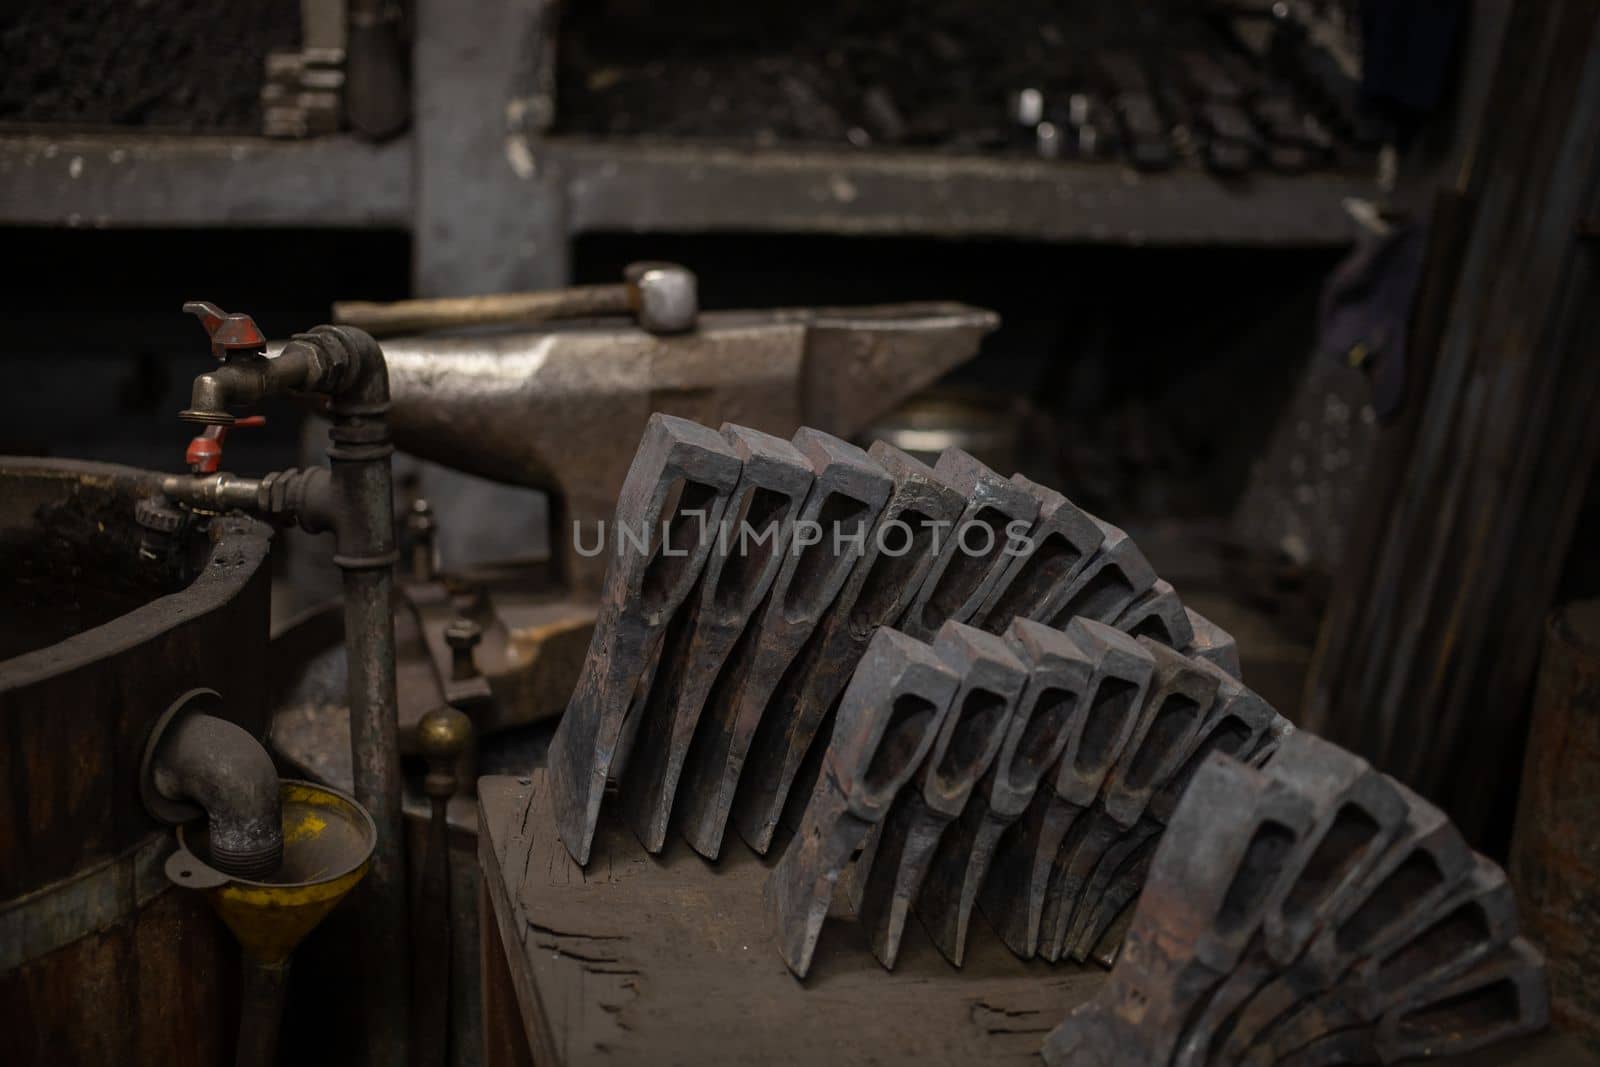 blacksmith tools and metal blanks in privet forge. High quality photo